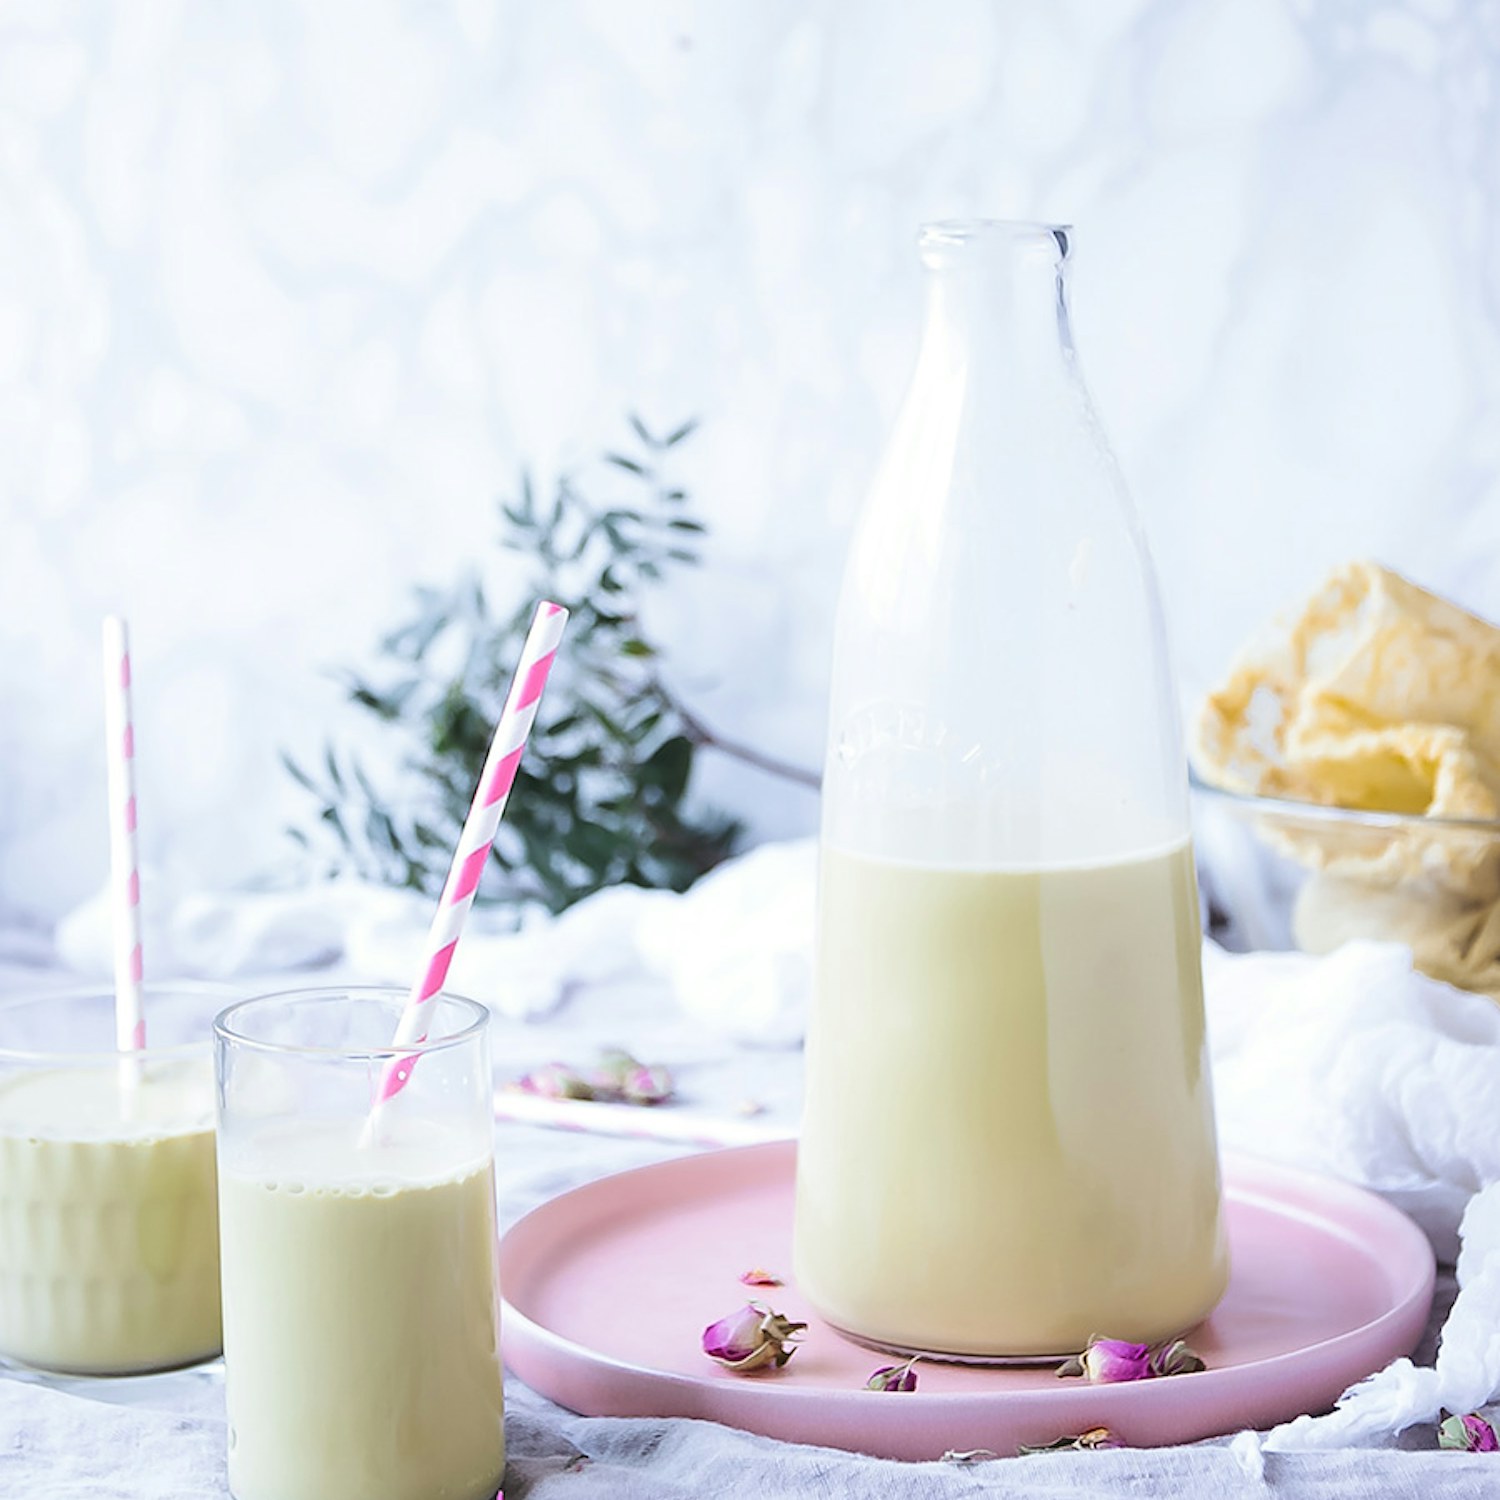 Almond and Pistachio Mylk, with Cardamon and Rose